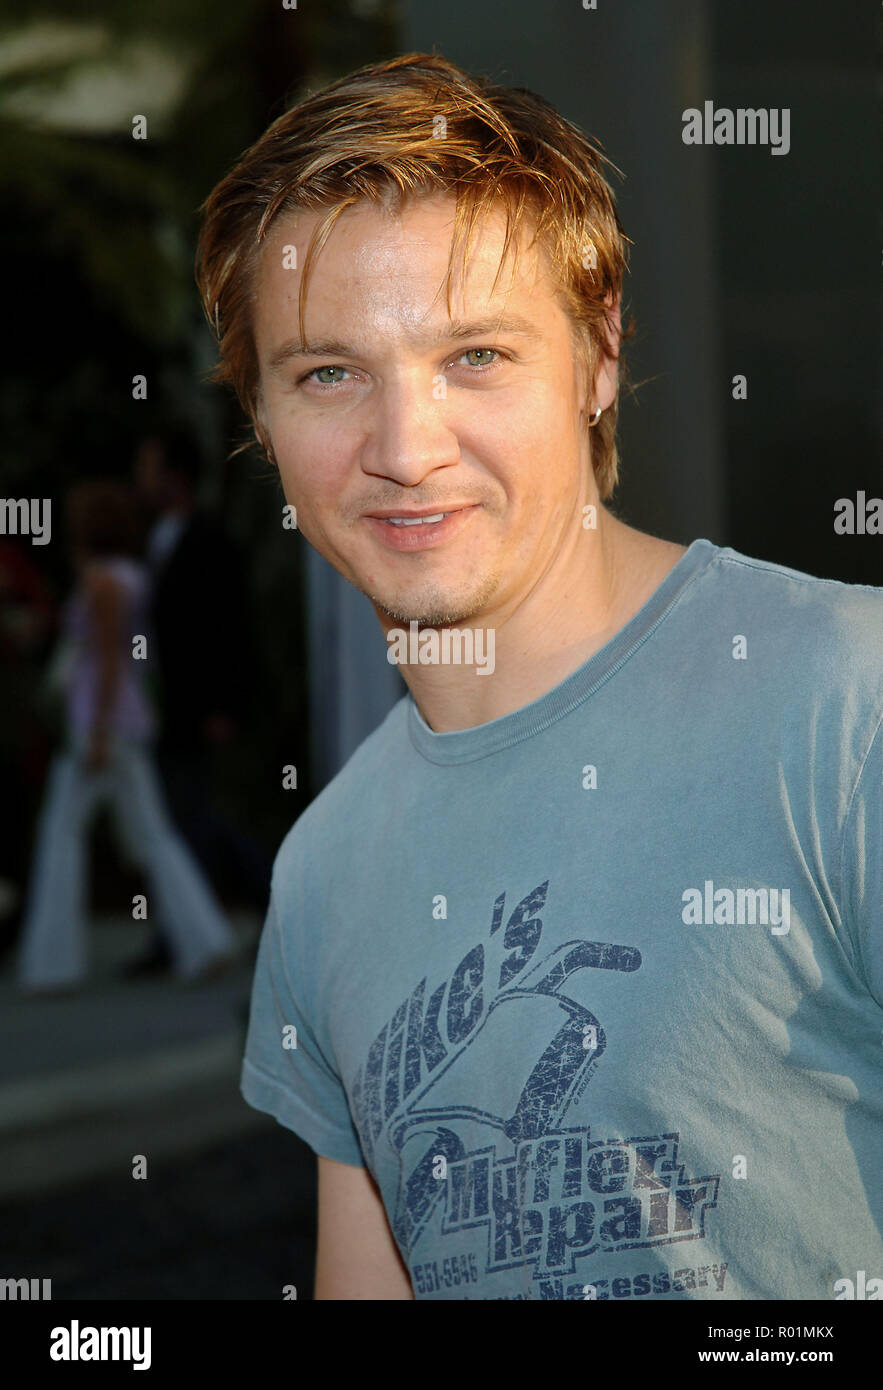 Jeremy Renner arriving at the Down In The Valley Premiere at ht e LA Film Festival Opening Night at the Arclight Theatre in Los Angeles. June 16, 2005.05 RennerJeremy035 Red Carpet Event, Vertical, USA, Film Industry, Celebrities,  Photography, Bestof, Arts Culture and Entertainment, Topix Celebrities fashion /  Vertical, Best of, Event in Hollywood Life - California,  Red Carpet and backstage, USA, Film Industry, Celebrities,  movie celebrities, TV celebrities, Music celebrities, Photography, Bestof, Arts Culture and Entertainment,  Topix, headshot, vertical, one person,, from the year , 2005 Stock Photo